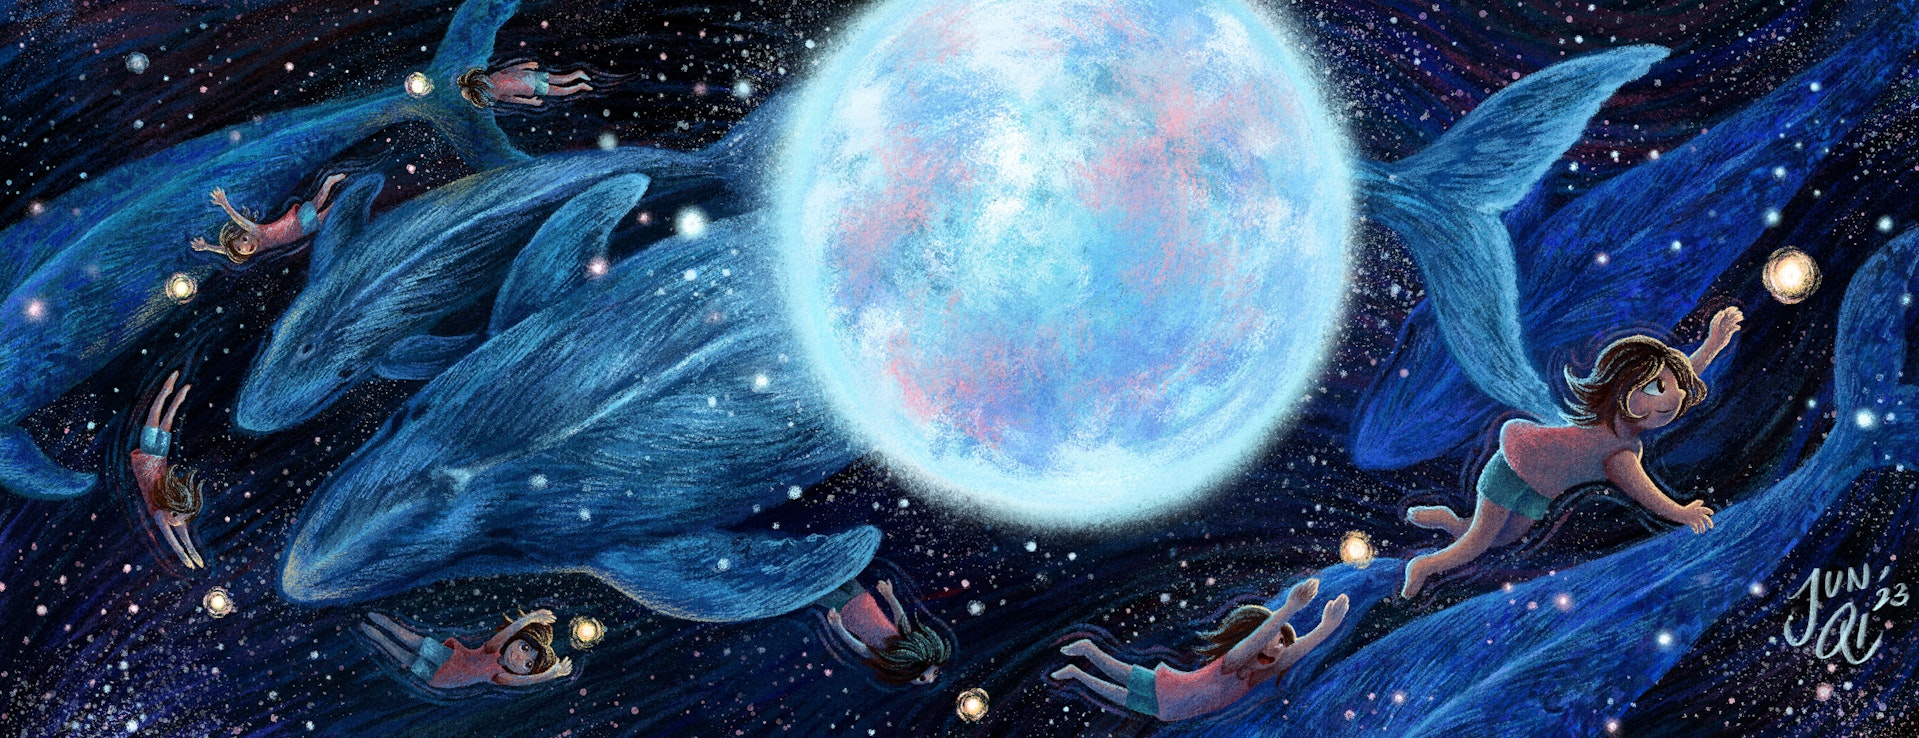 Illustration of a young girl swimming amongst blue whales in spacesea